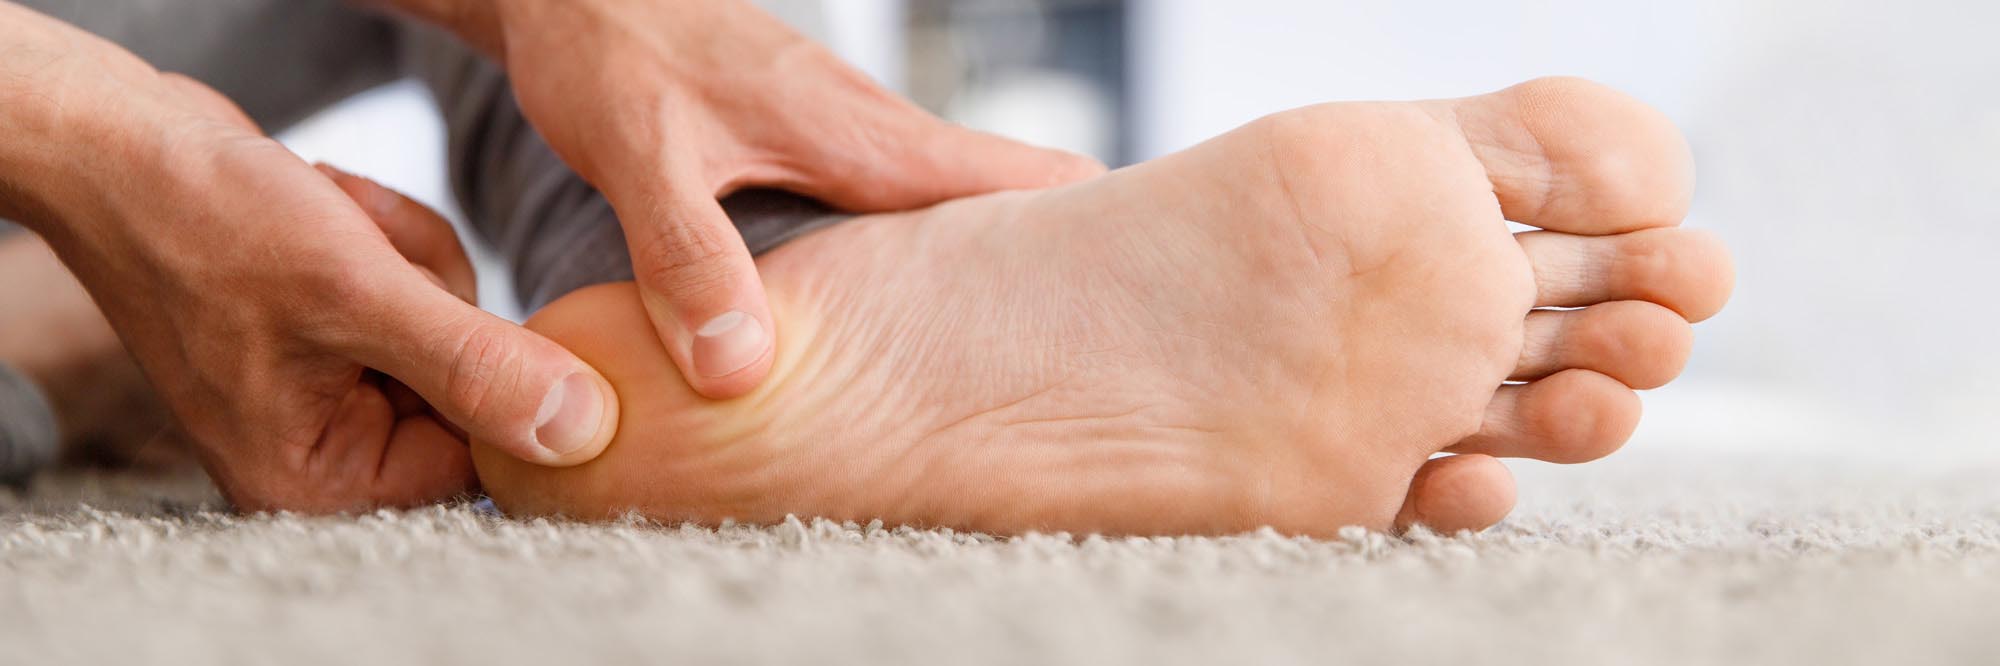 5 Reasons You May be Experiencing Foot Pain in the Morning - Foot and Ankle  Group